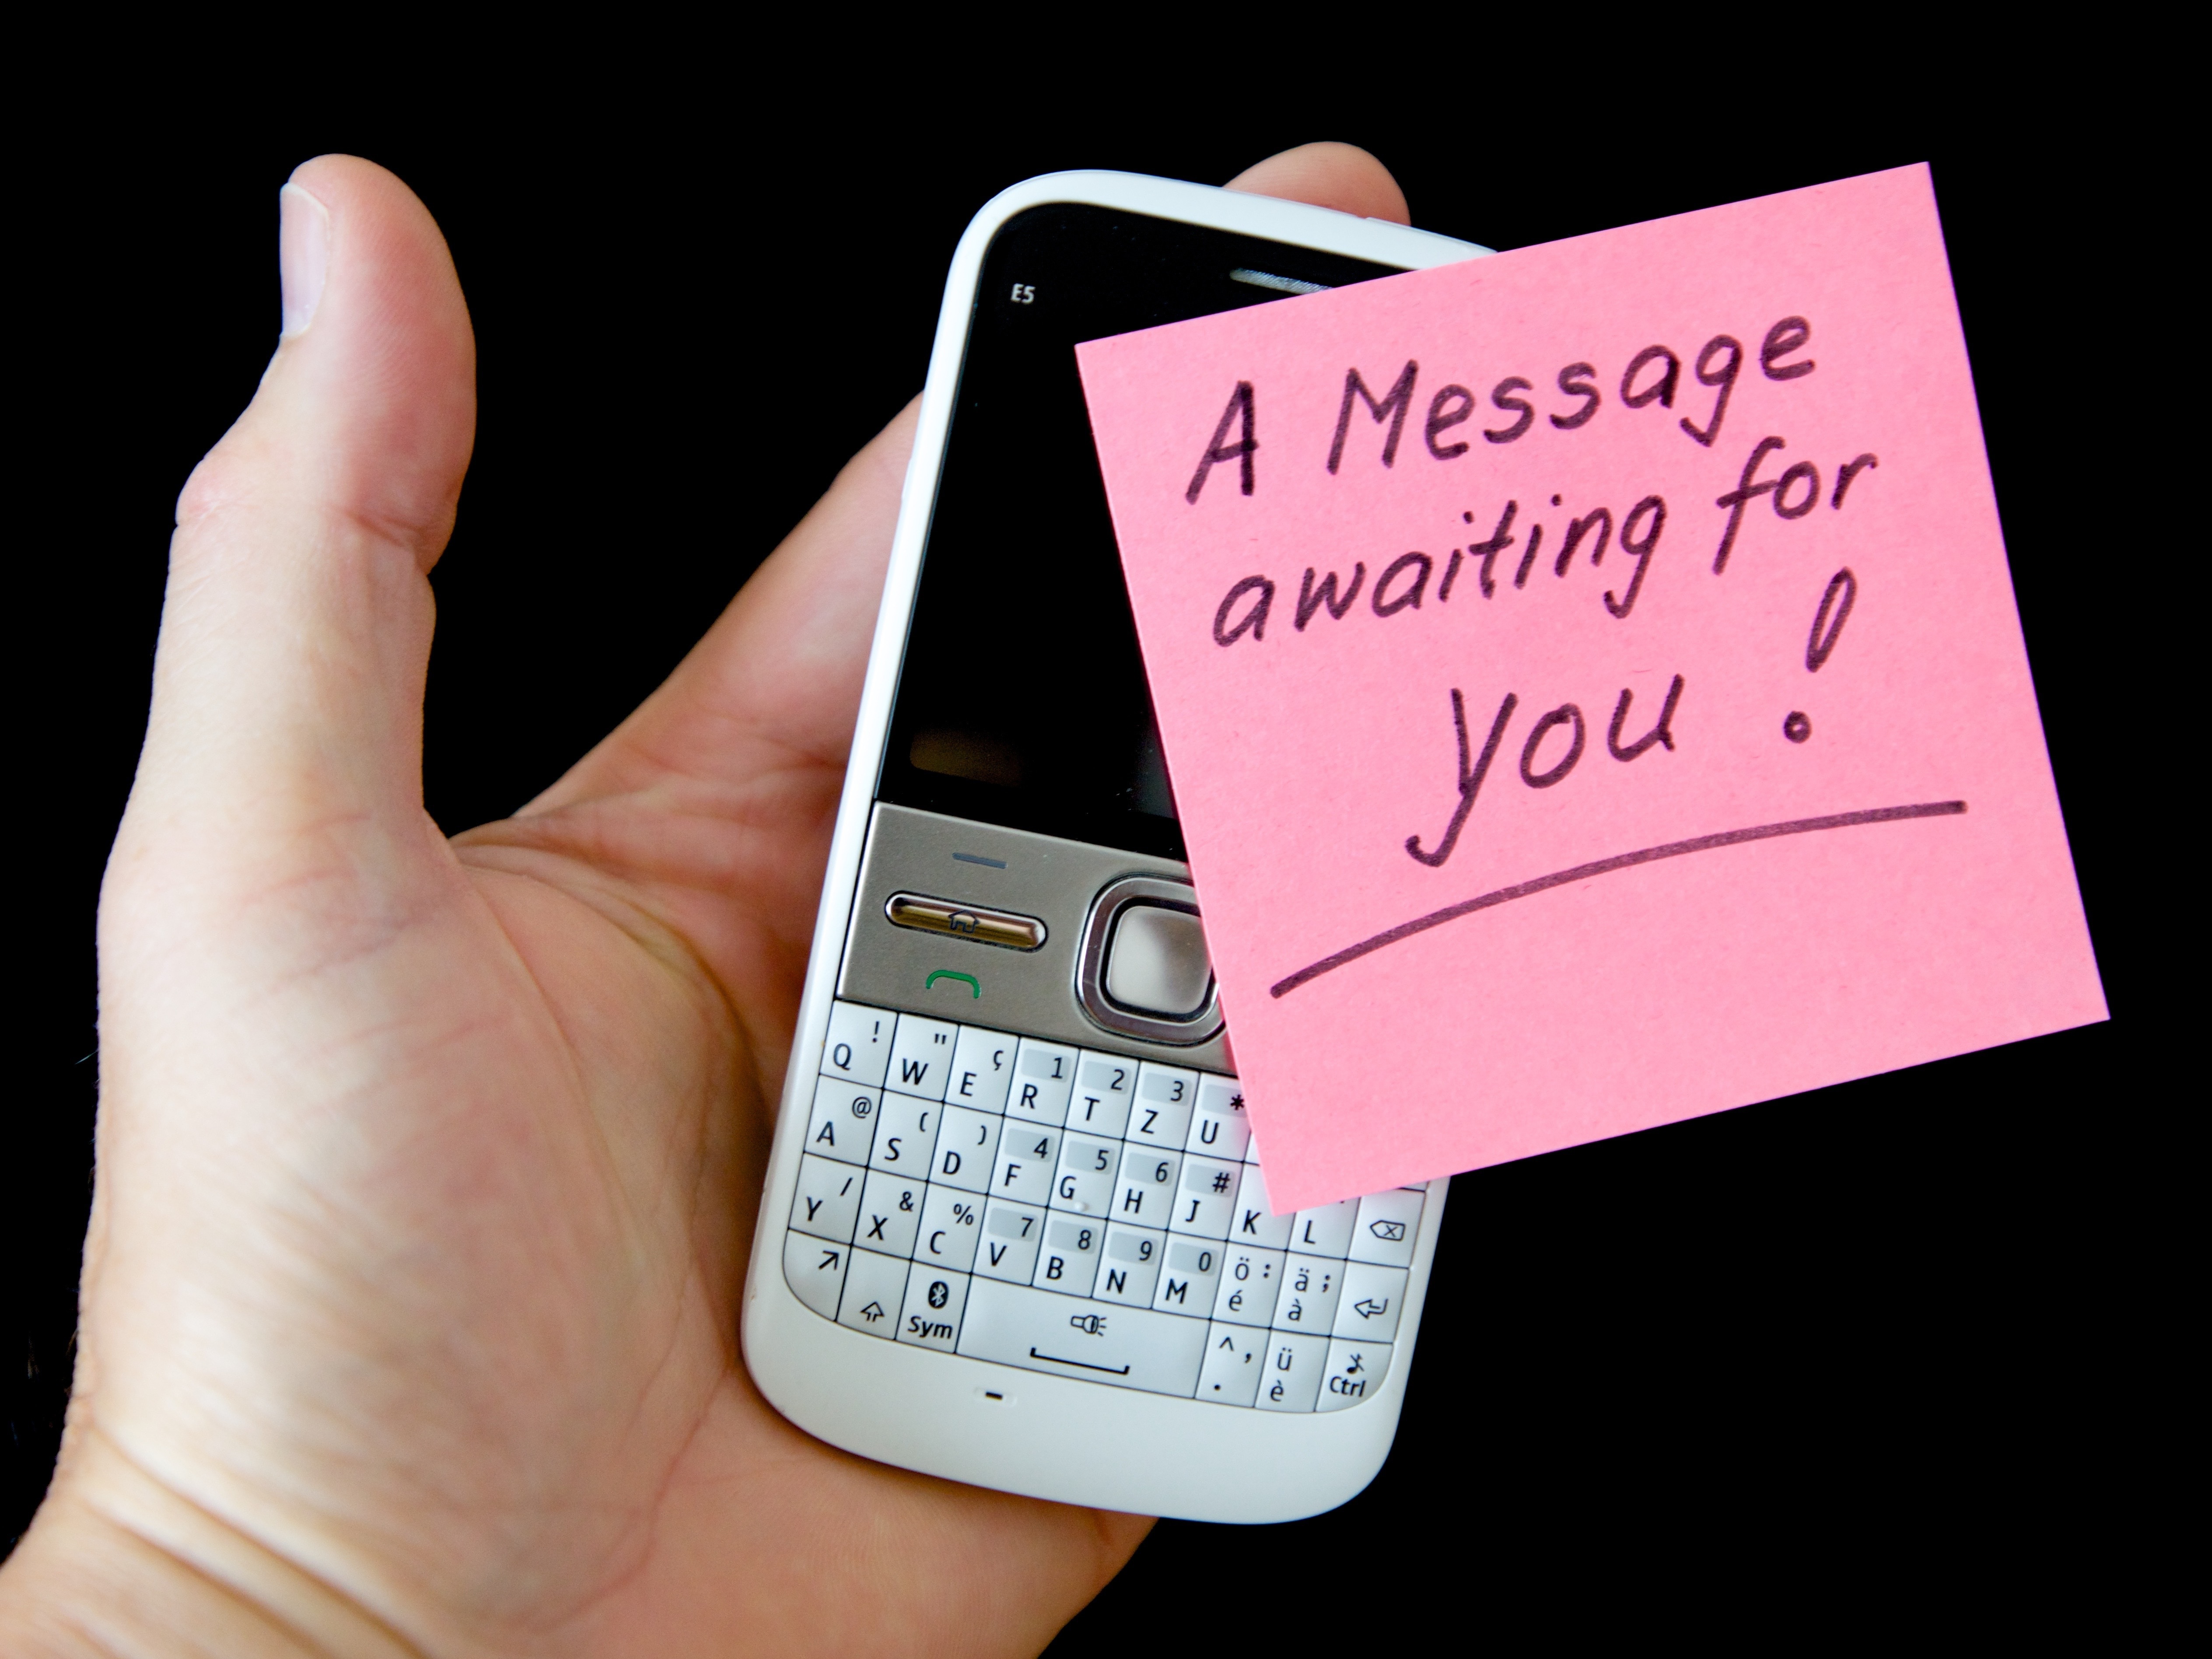 person holding qwerty phone with a message awaiting for you sticky note